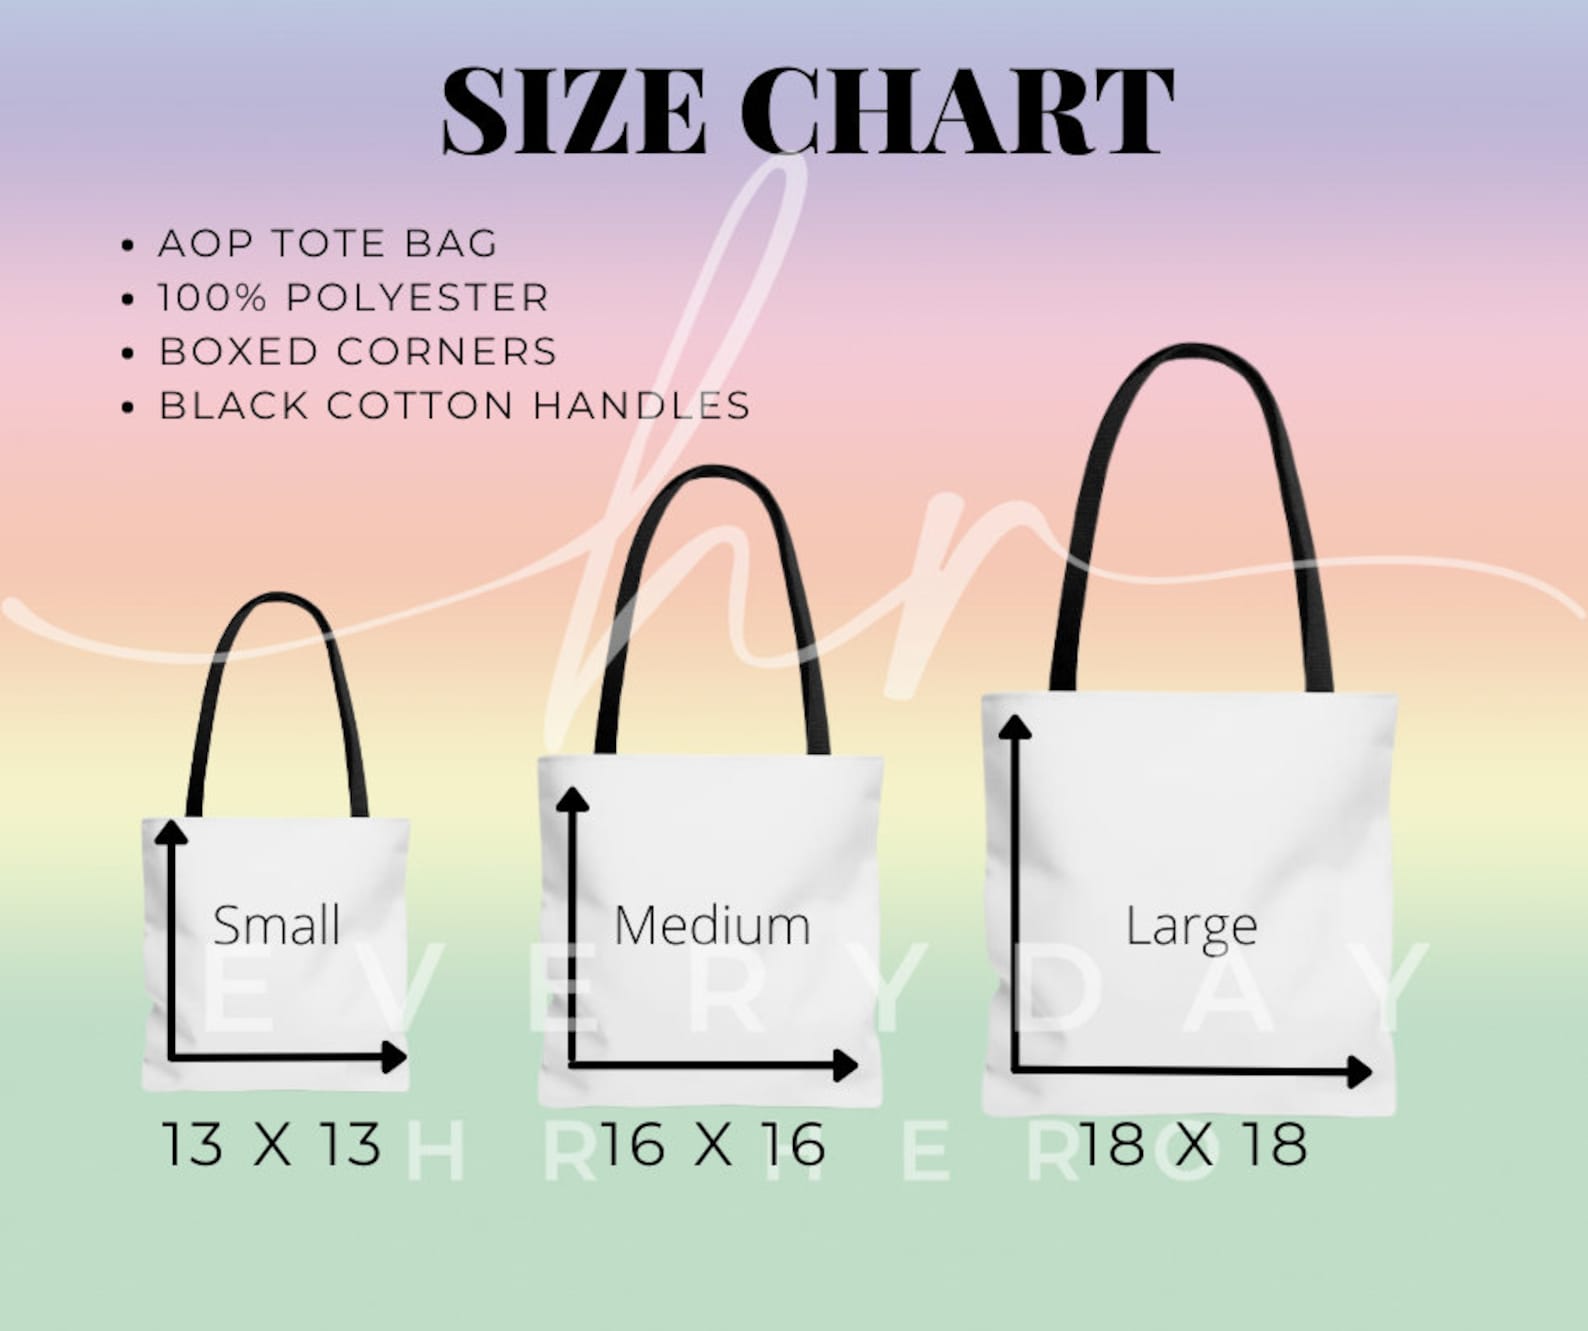 Tote Bag Size Chart, AOP Tote Size Chart, Sizing Chart for Tote Bags ...